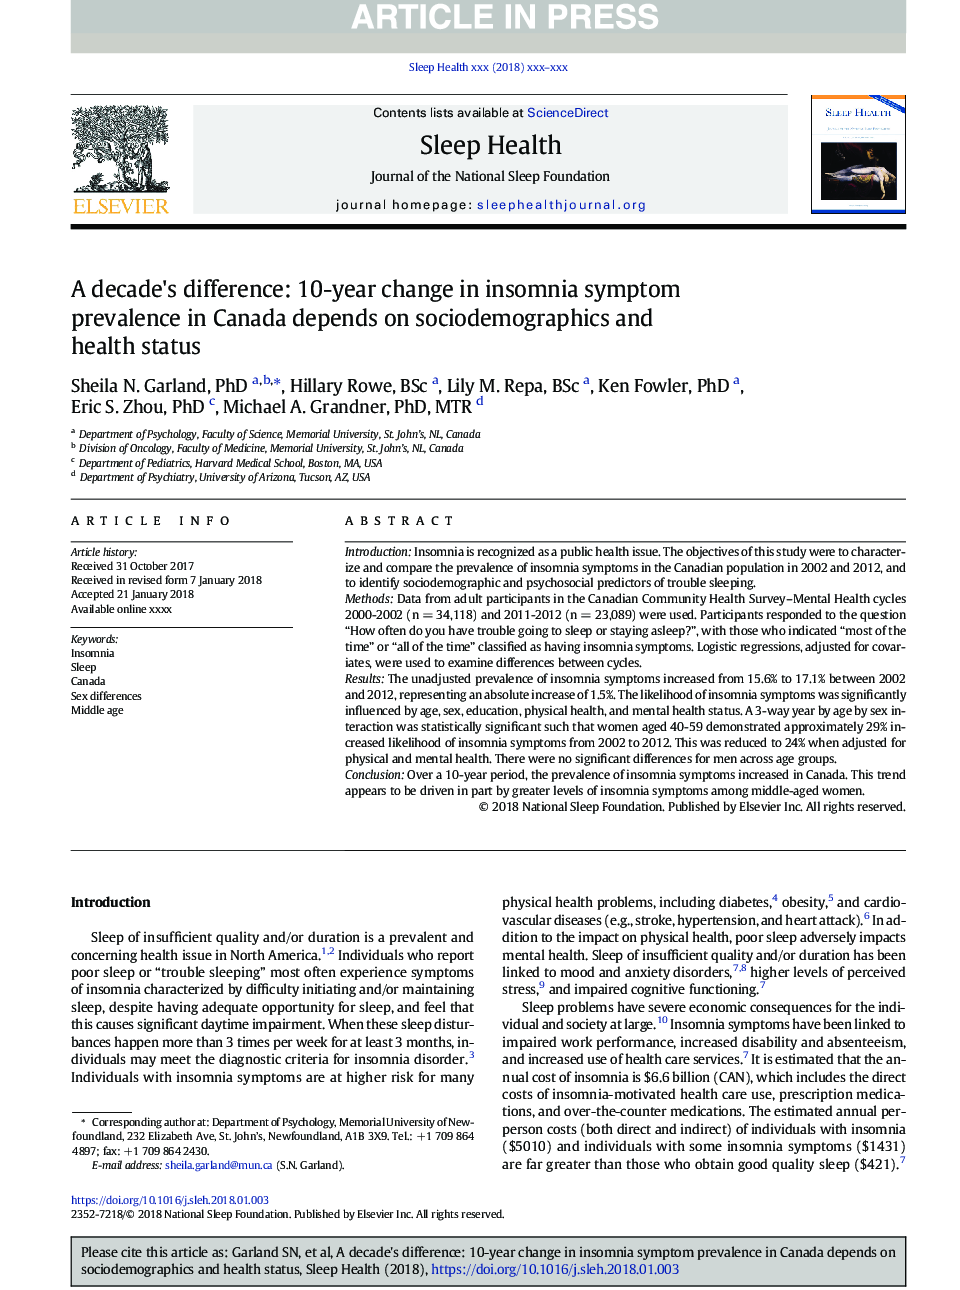 A decade's difference: 10-year change in insomnia symptom prevalence in Canada depends on sociodemographics and health status